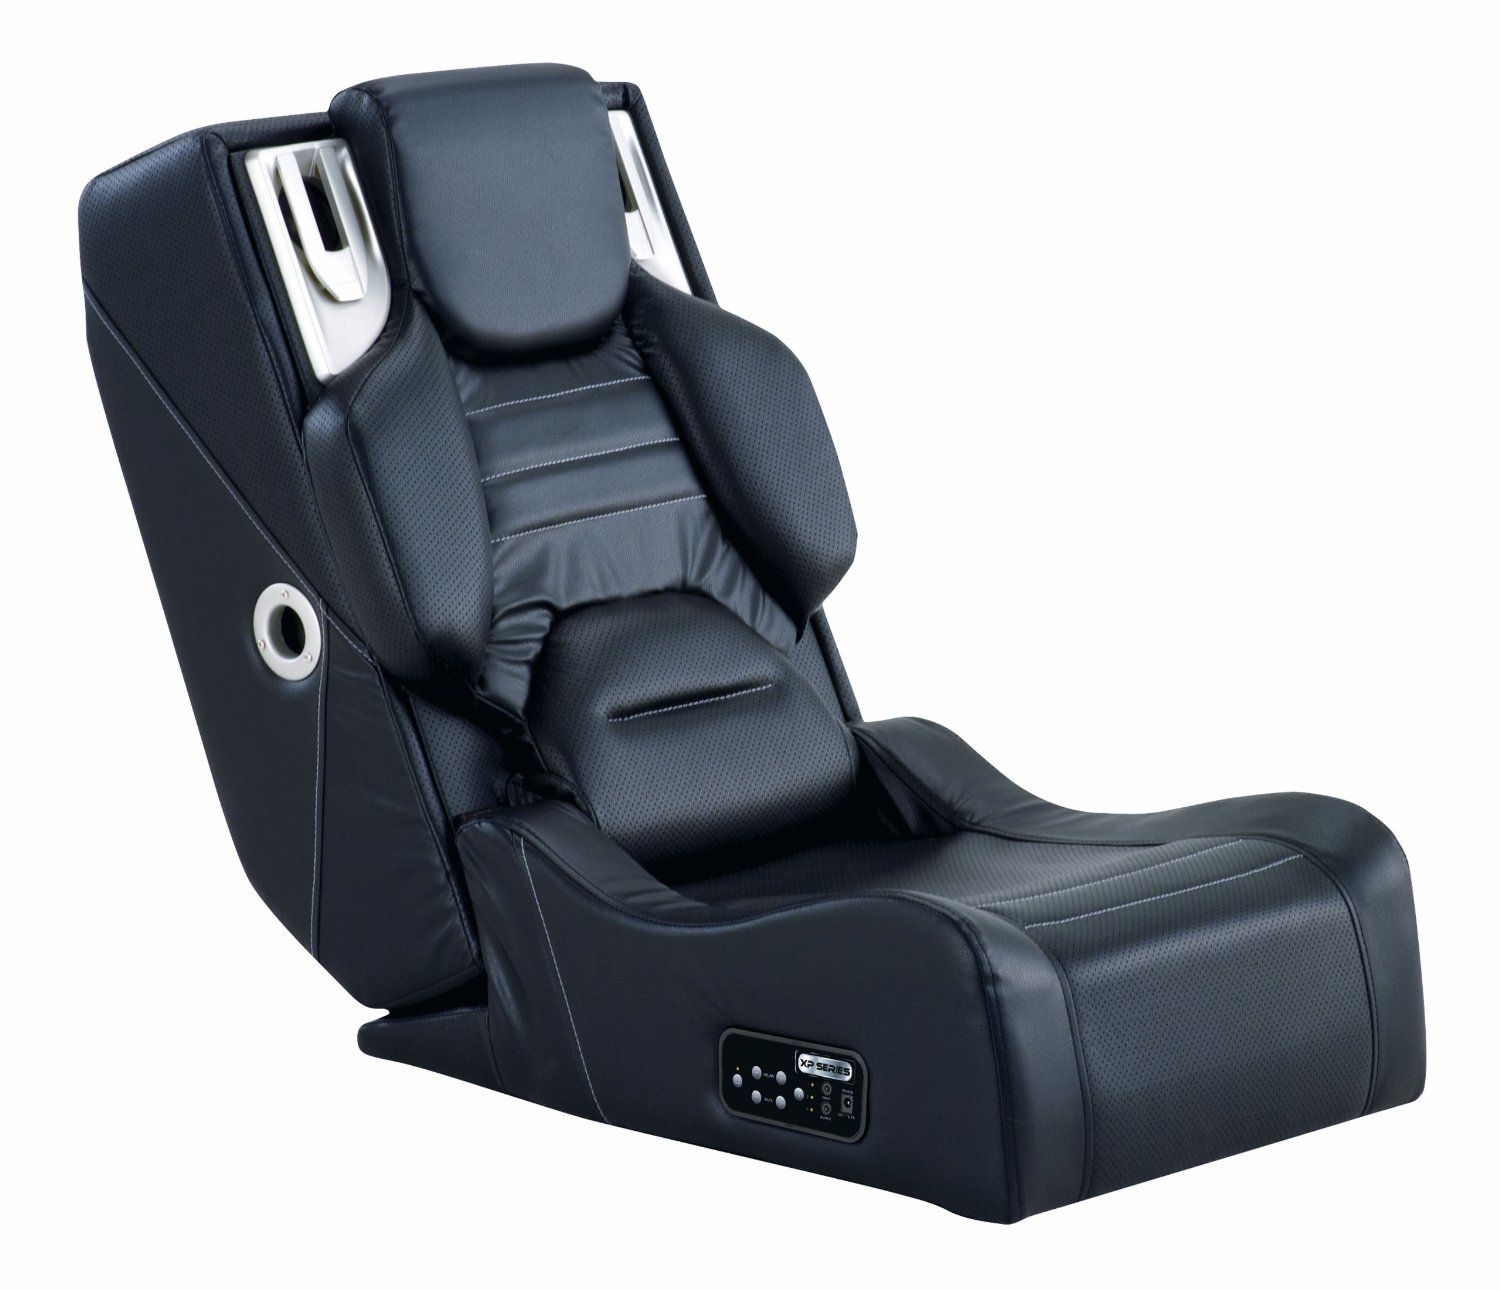 Gaming chair for adults